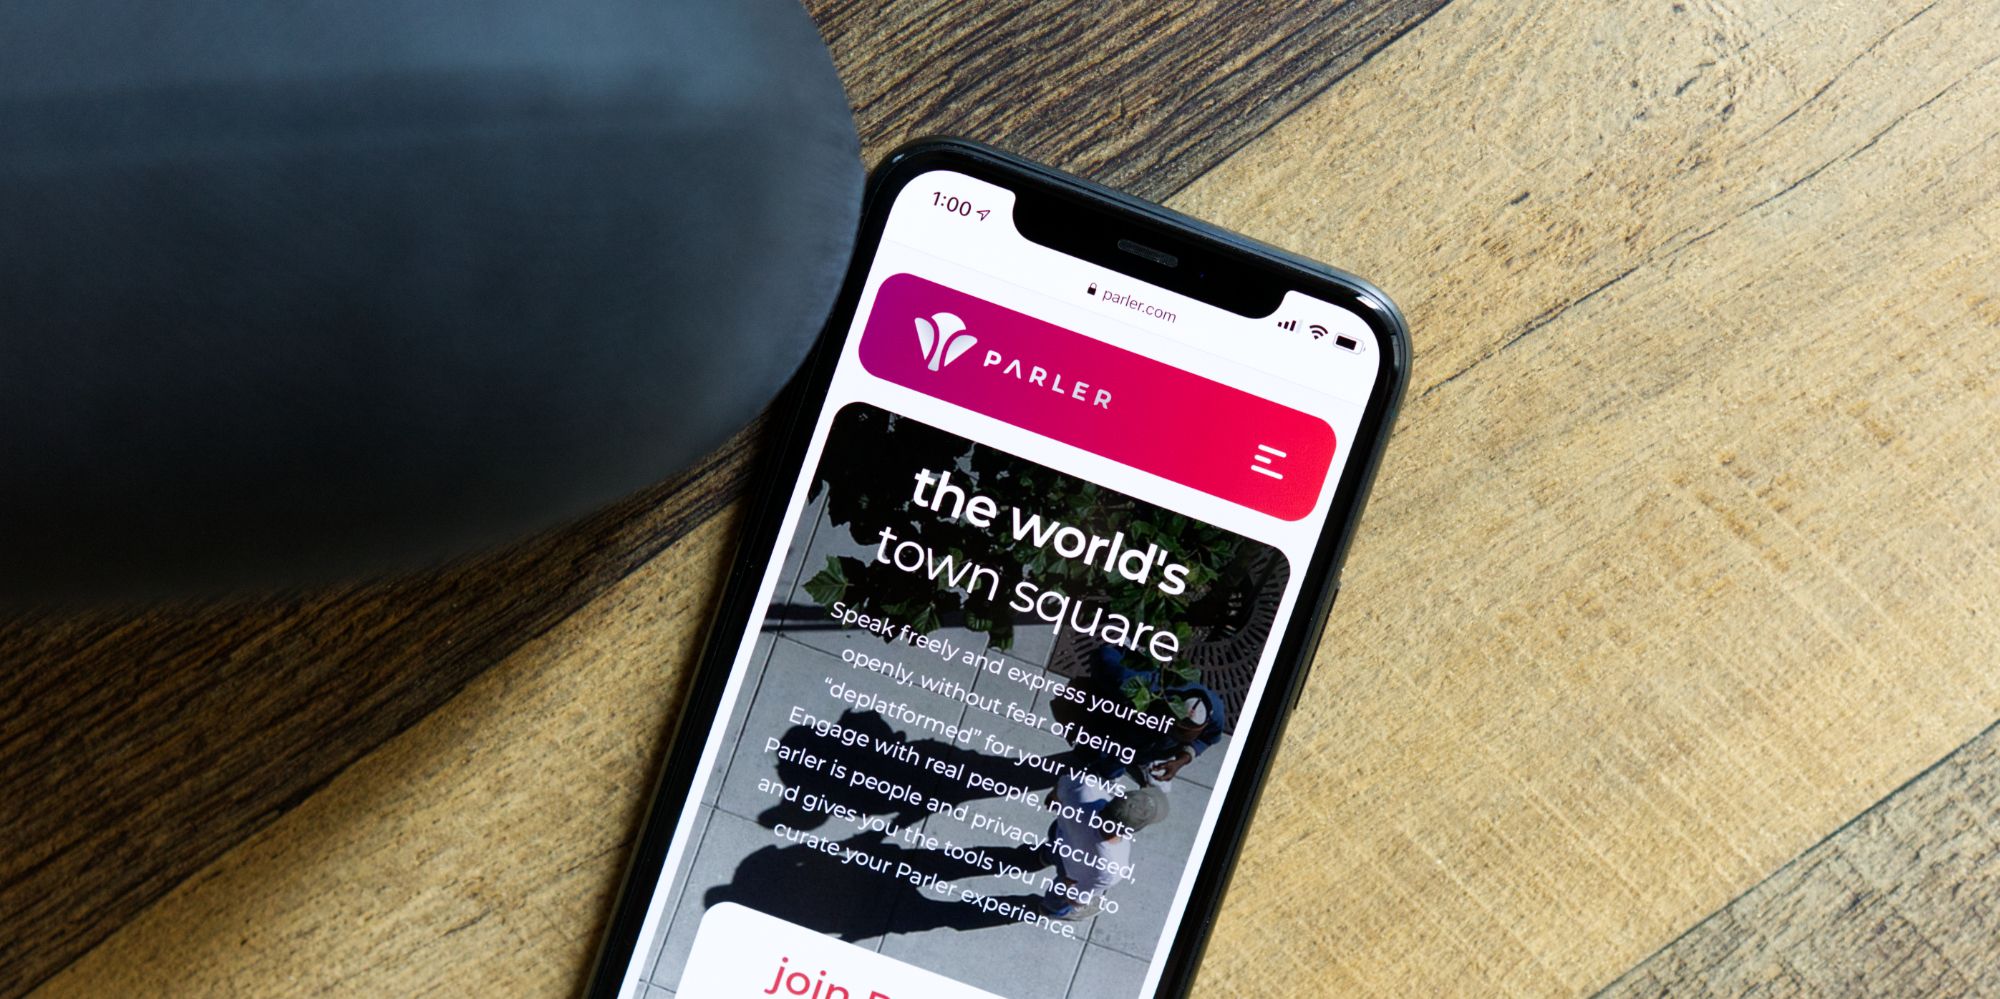 The Parler website on an iPhone 11 Pro